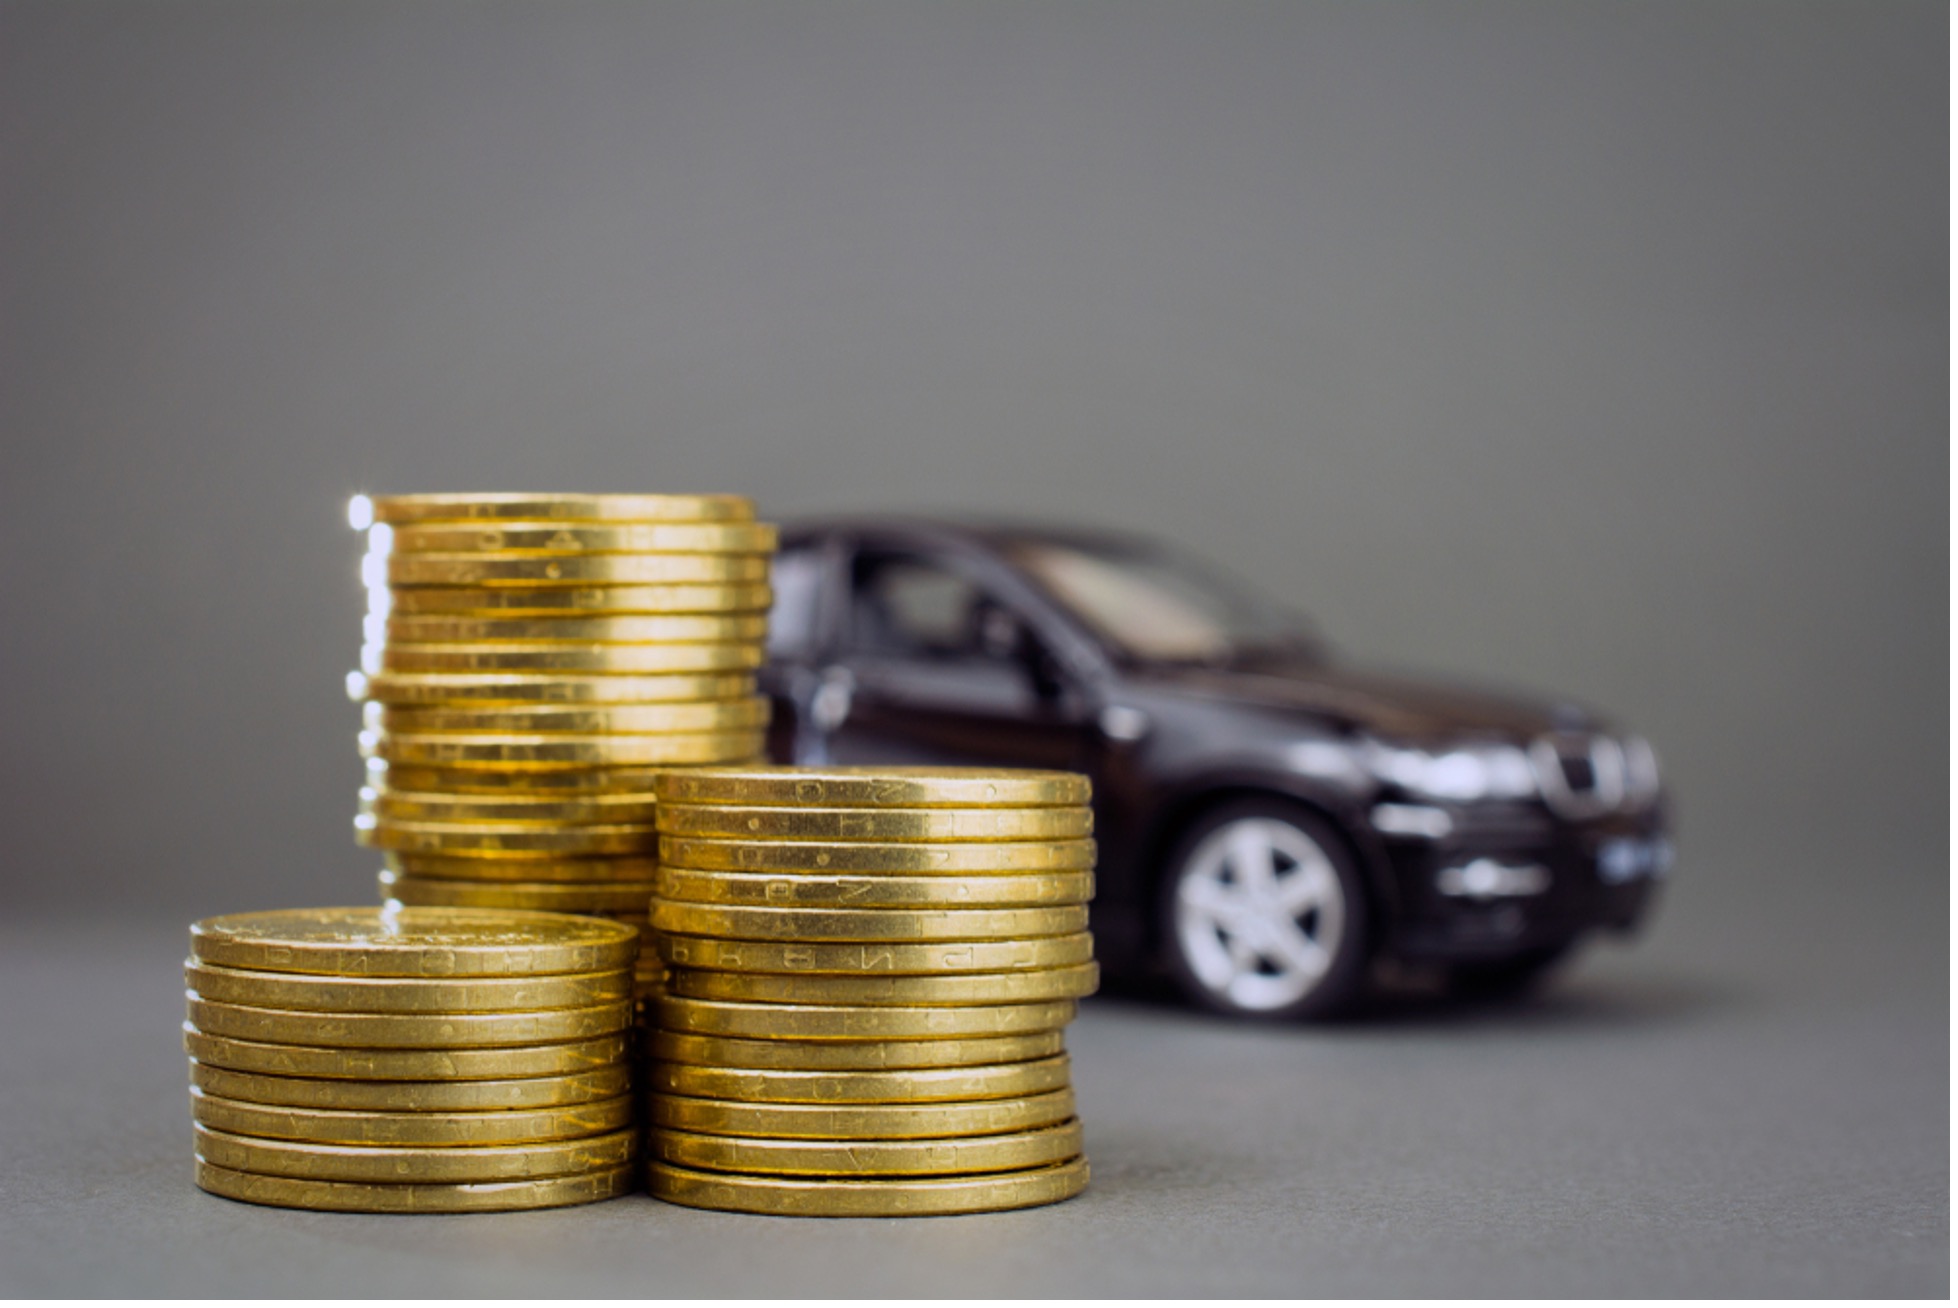 4 Insider Tips to Help You Pay Less for a Car